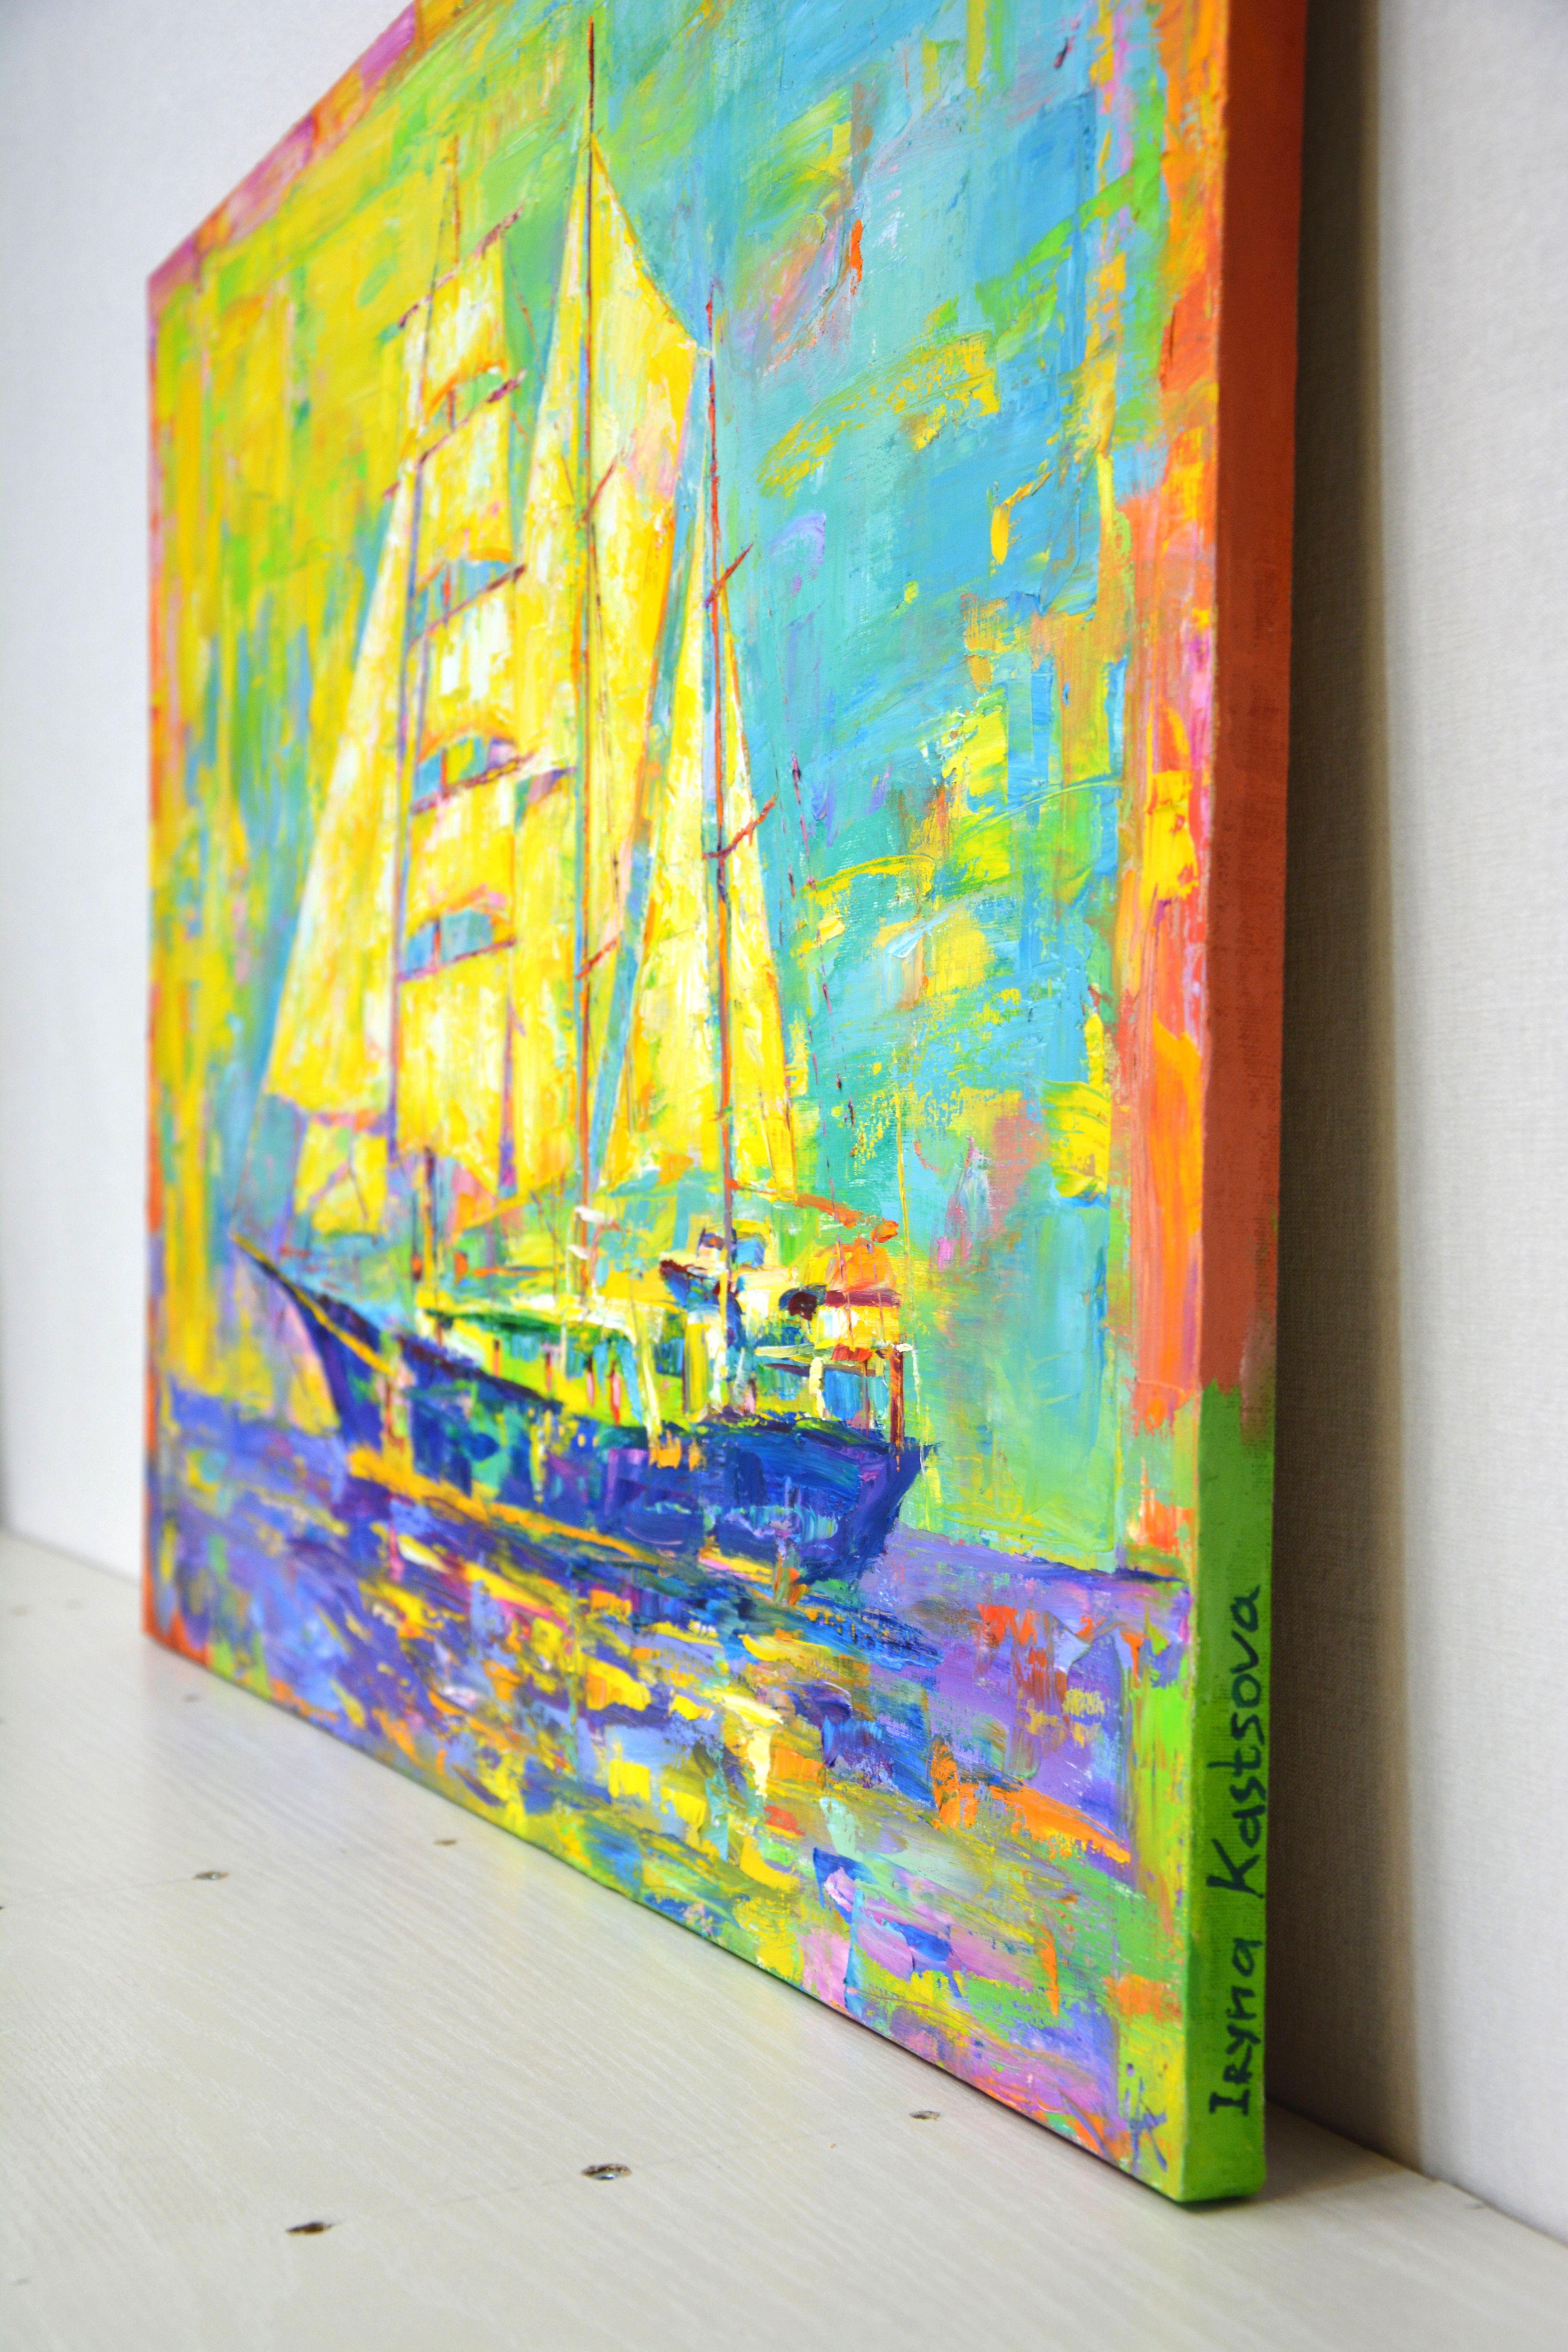 Ship, Painting, Oil on Canvas 4